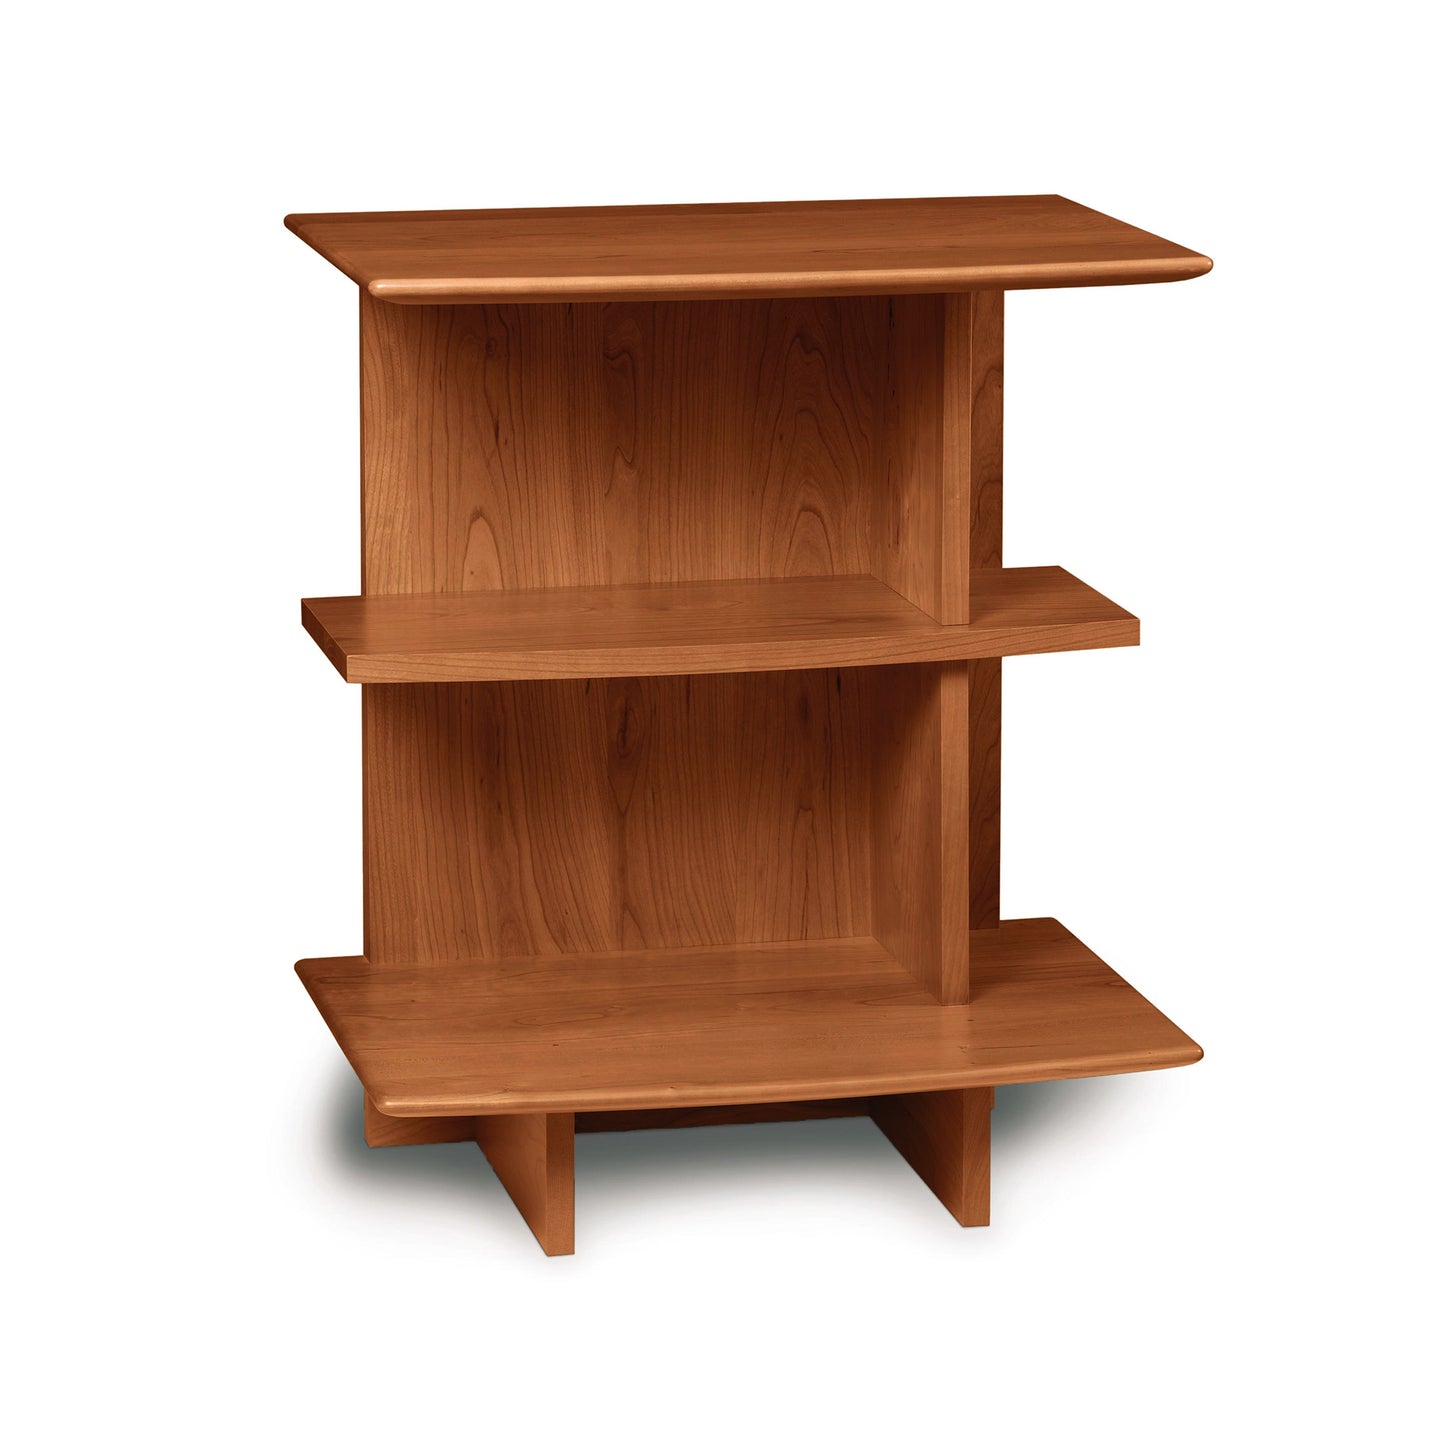 A Copeland Furniture Sarah Open Shelf Nightstand isolated on a white background.